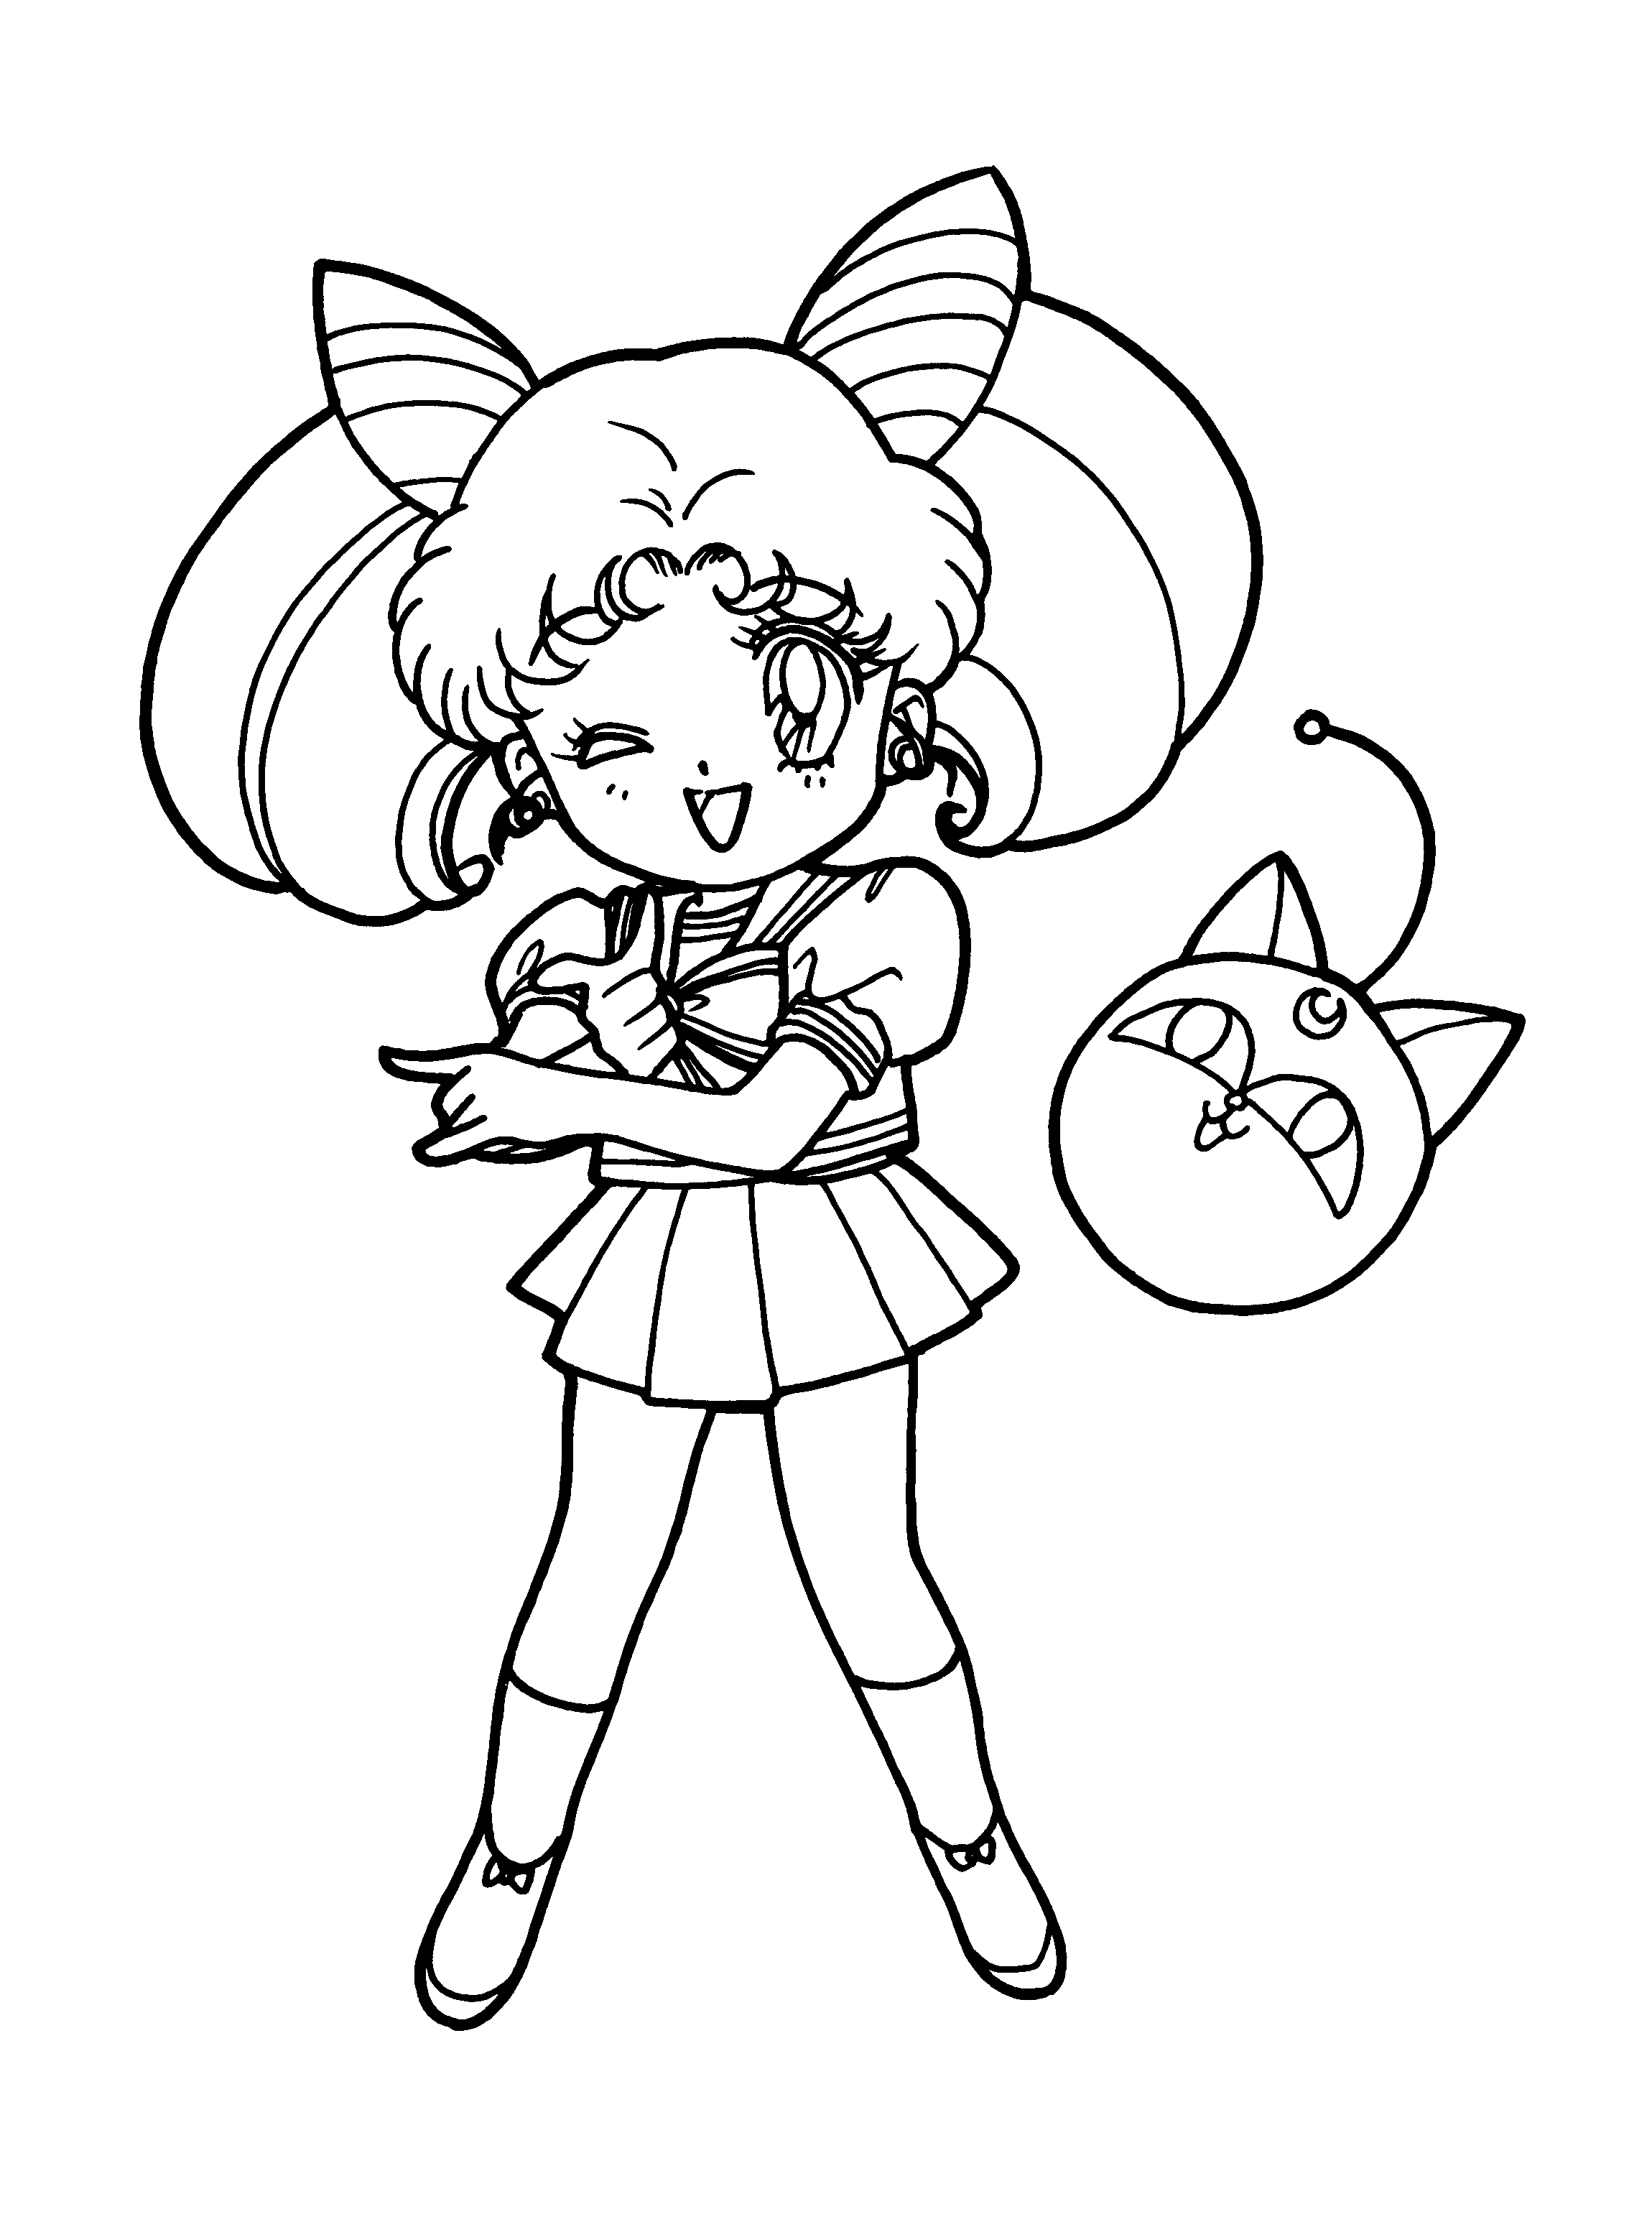 animated-coloring-pages-sailor-moon-image-0115